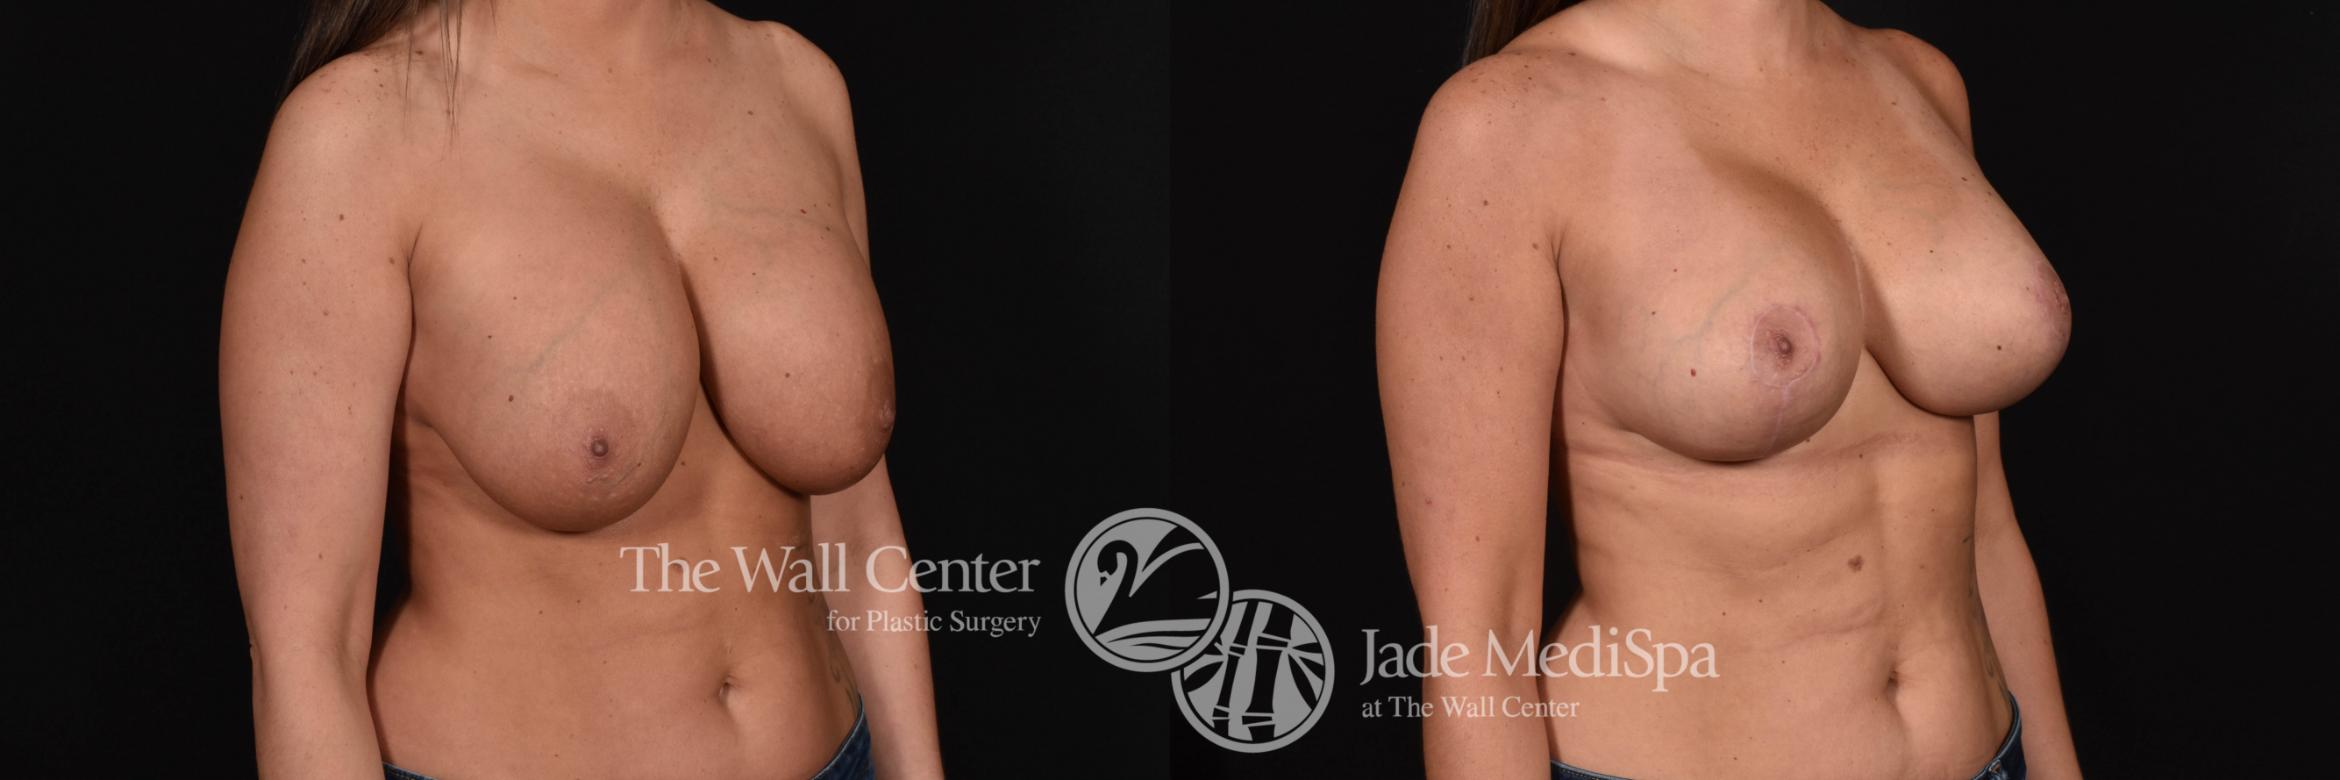 Breast Implant Exchange Right Oblique Photo, Shreveport, Louisiana, The Wall Center for Plastic Surgery, Case 884